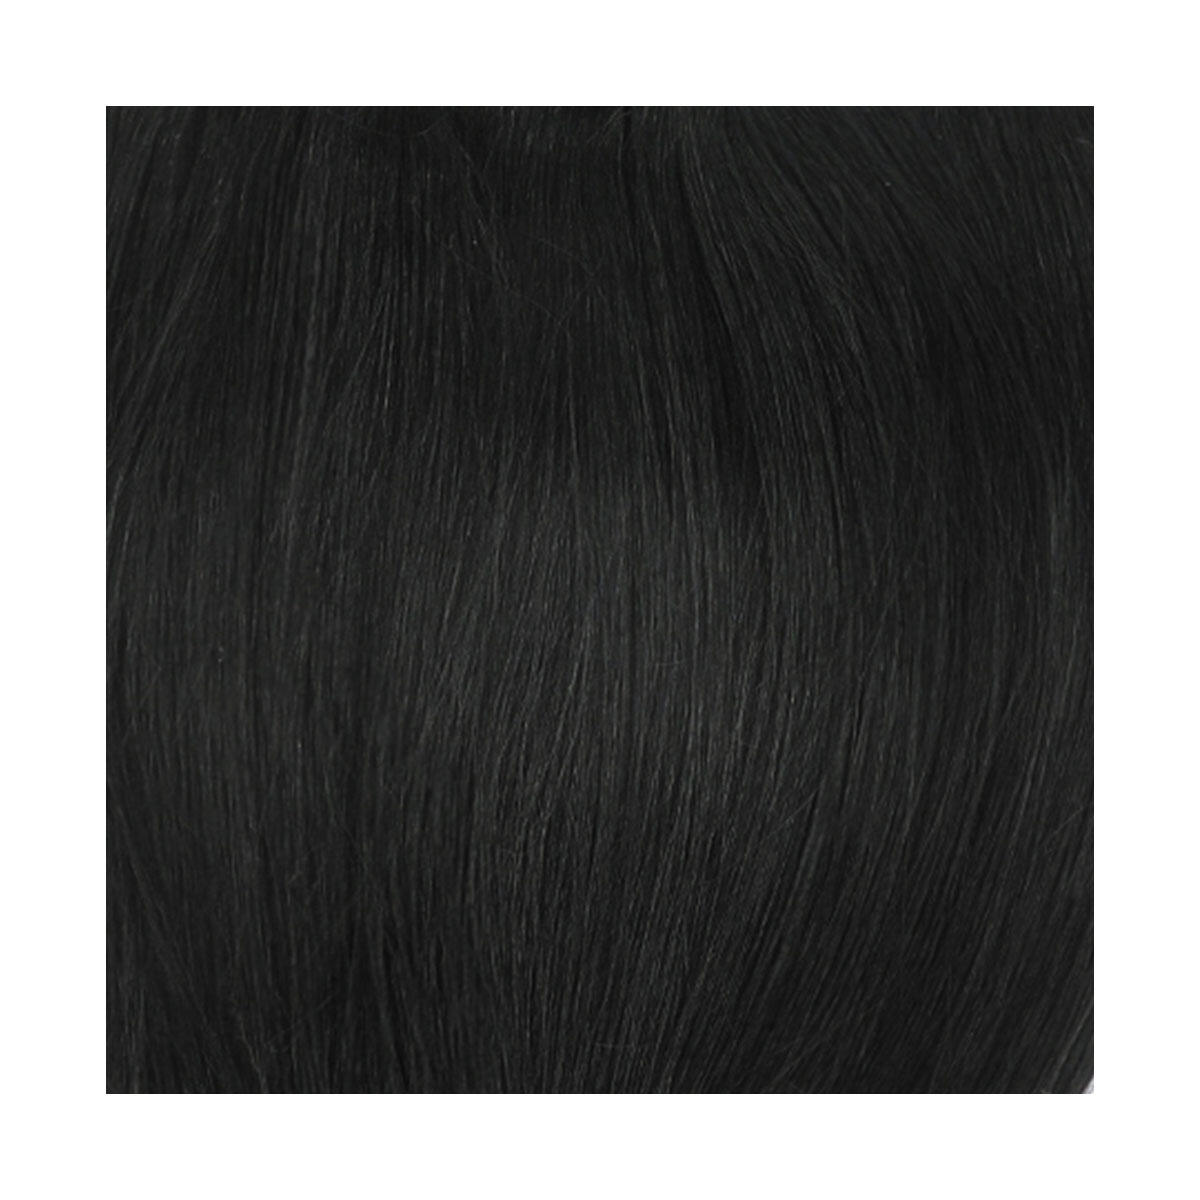 Clip-in Ponytail Ponytail made of real hair 1.0 Black 40 cm